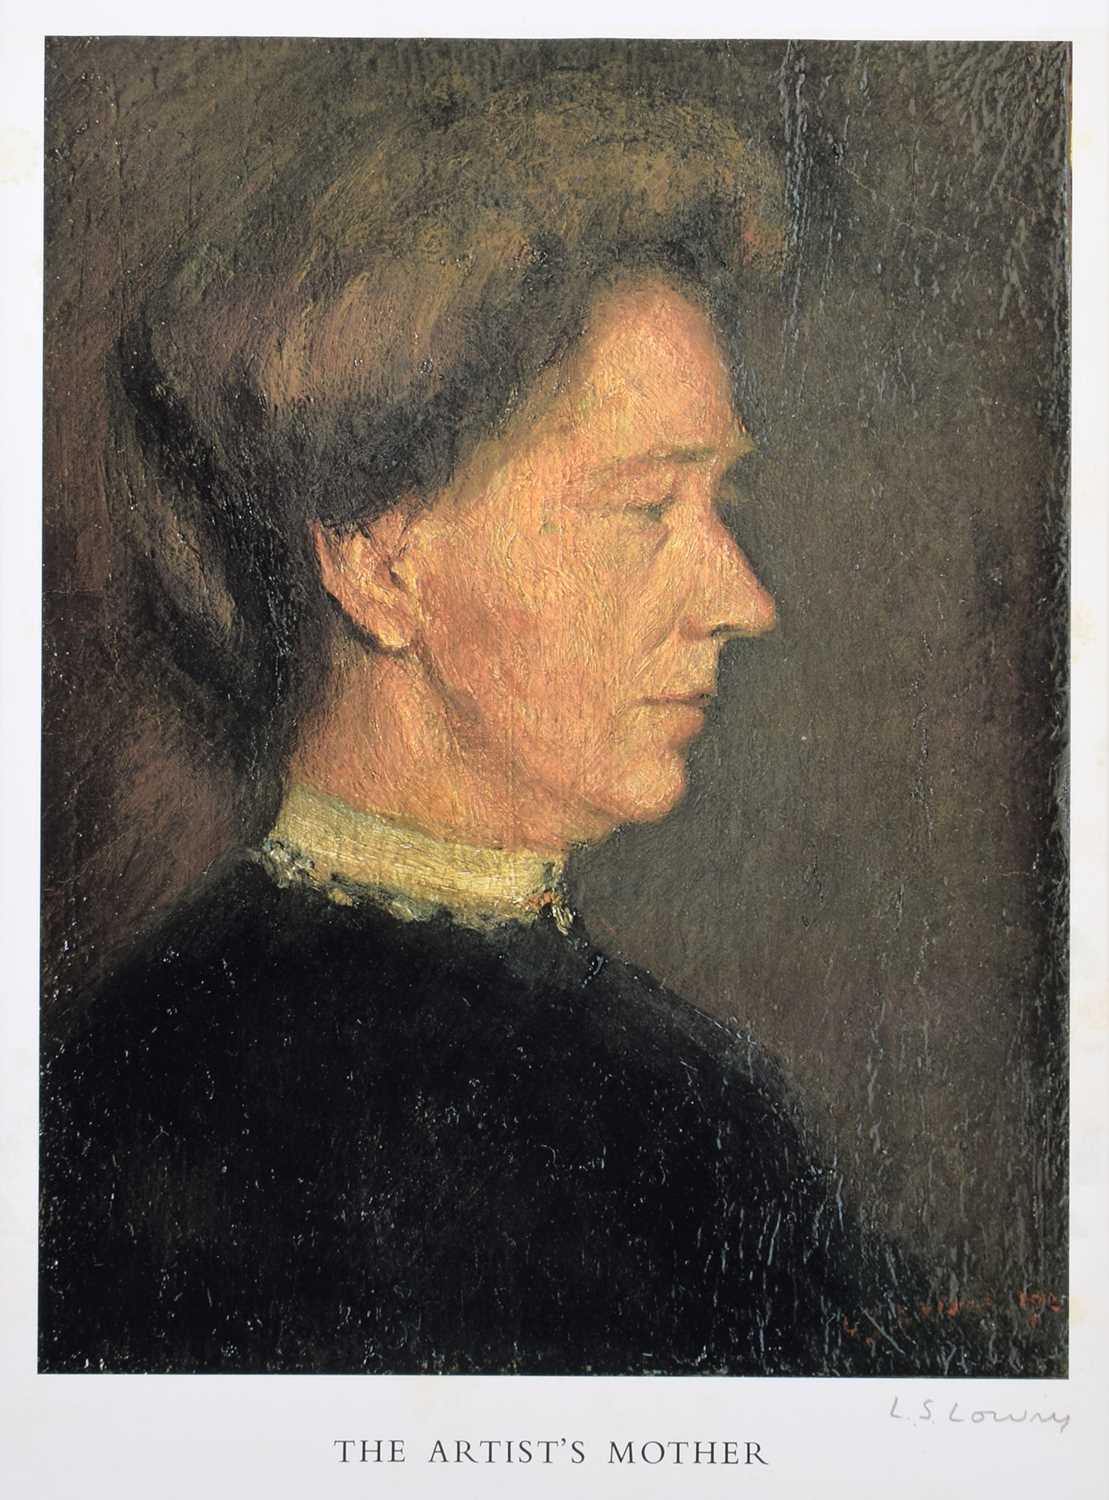 L.S. Lowry R.A. (British 1887-1976) "Self Portrait", "The Artist's Mother" and "The Artist's Father" - Image 2 of 4